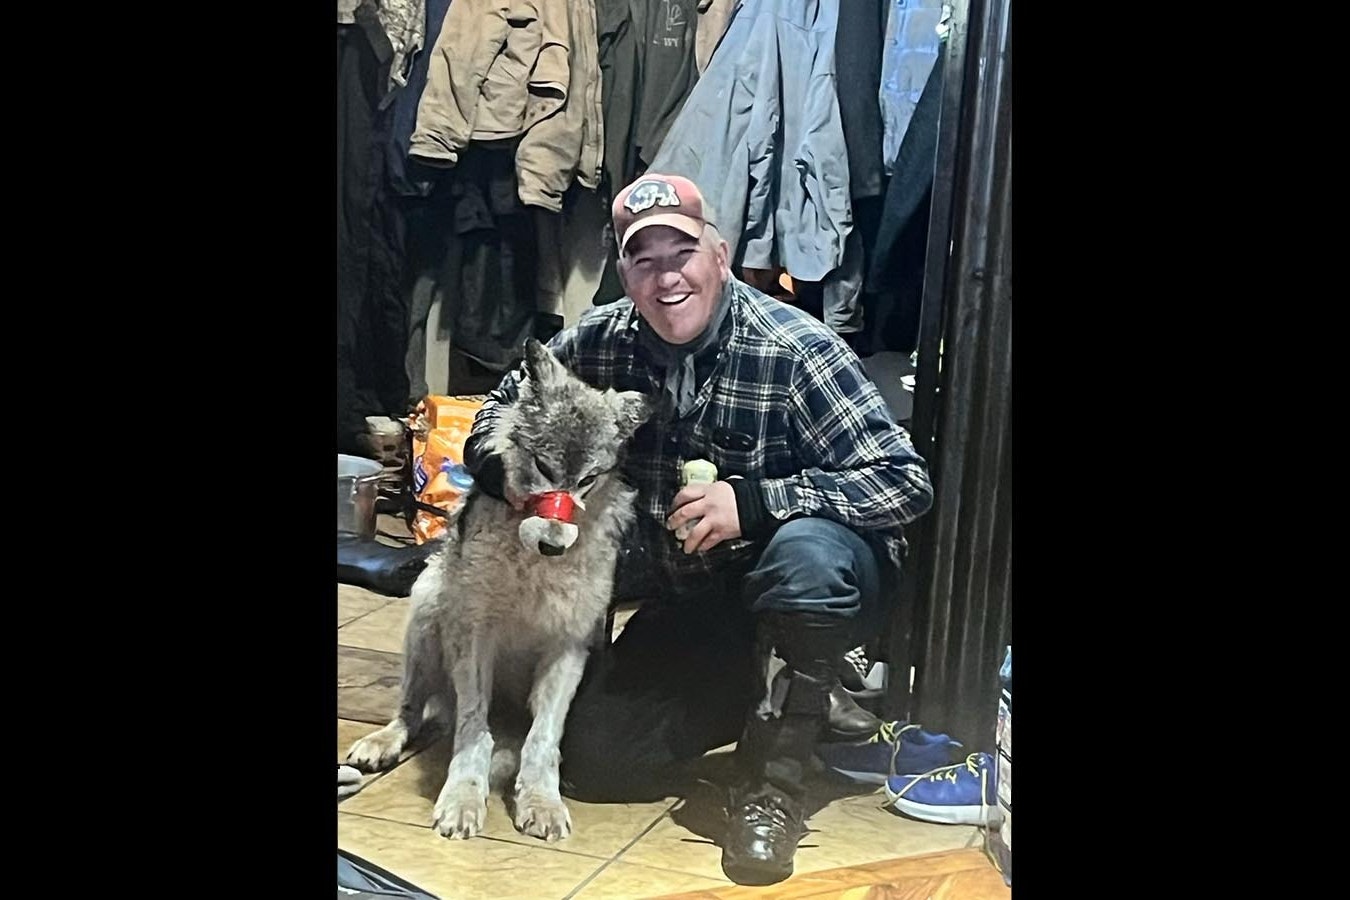 In this photo provided exclusively to Cowboy State Daily, a wolf with red tape wound tightly around its muzzle looks down as Cody Roberts of Daniel, Wyoming, poses with it. No reproduction without permission.